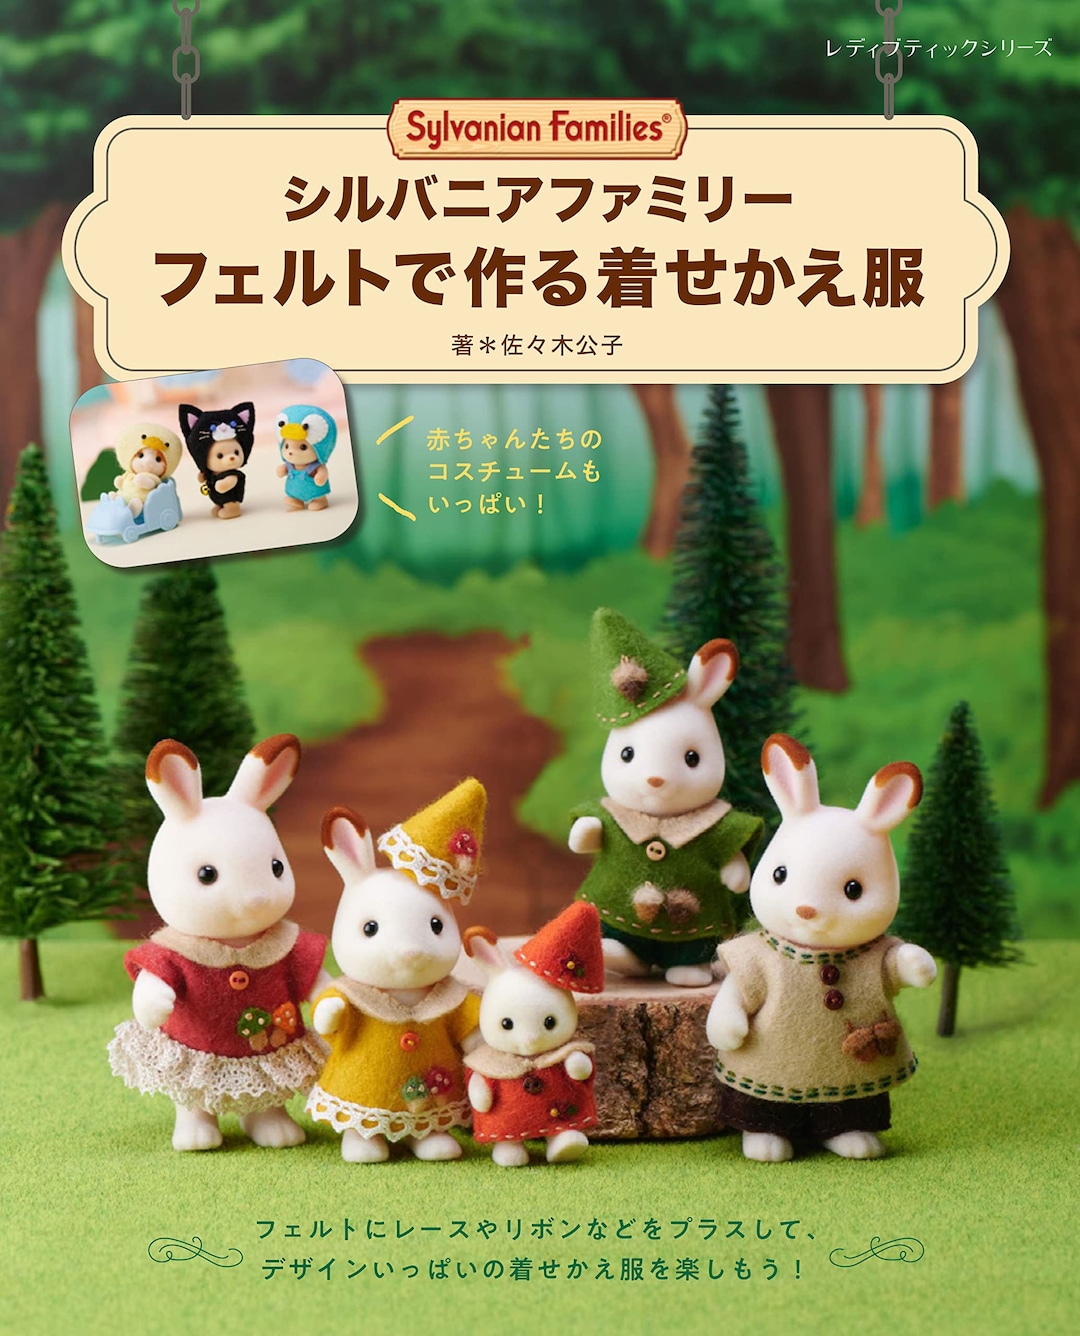 Sylvanian Families and Calico Critters Felt Dresses and Accessories  Japanese Craft Book -  UK